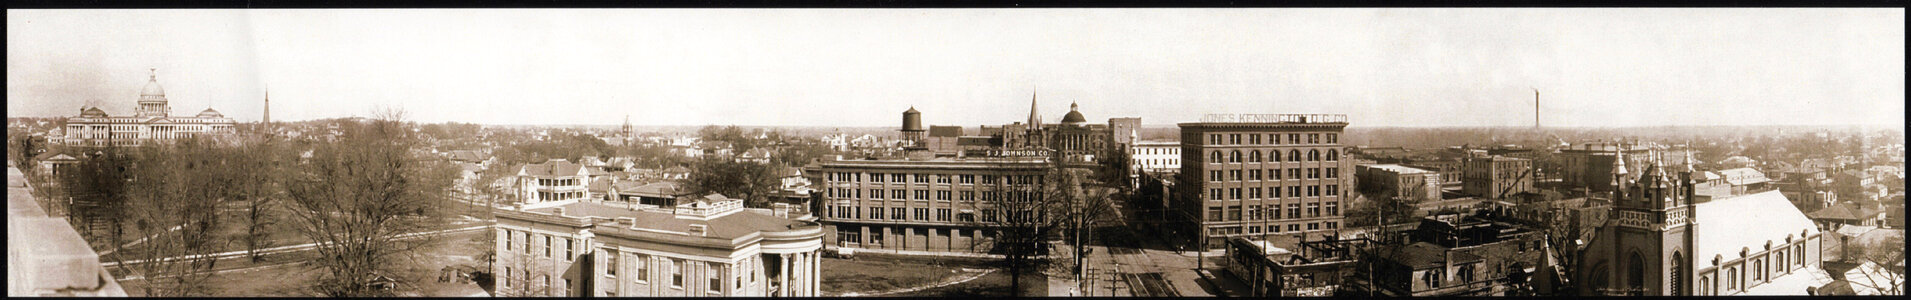 Panorama of downtown Jackson in 1910 in Mississippi photo